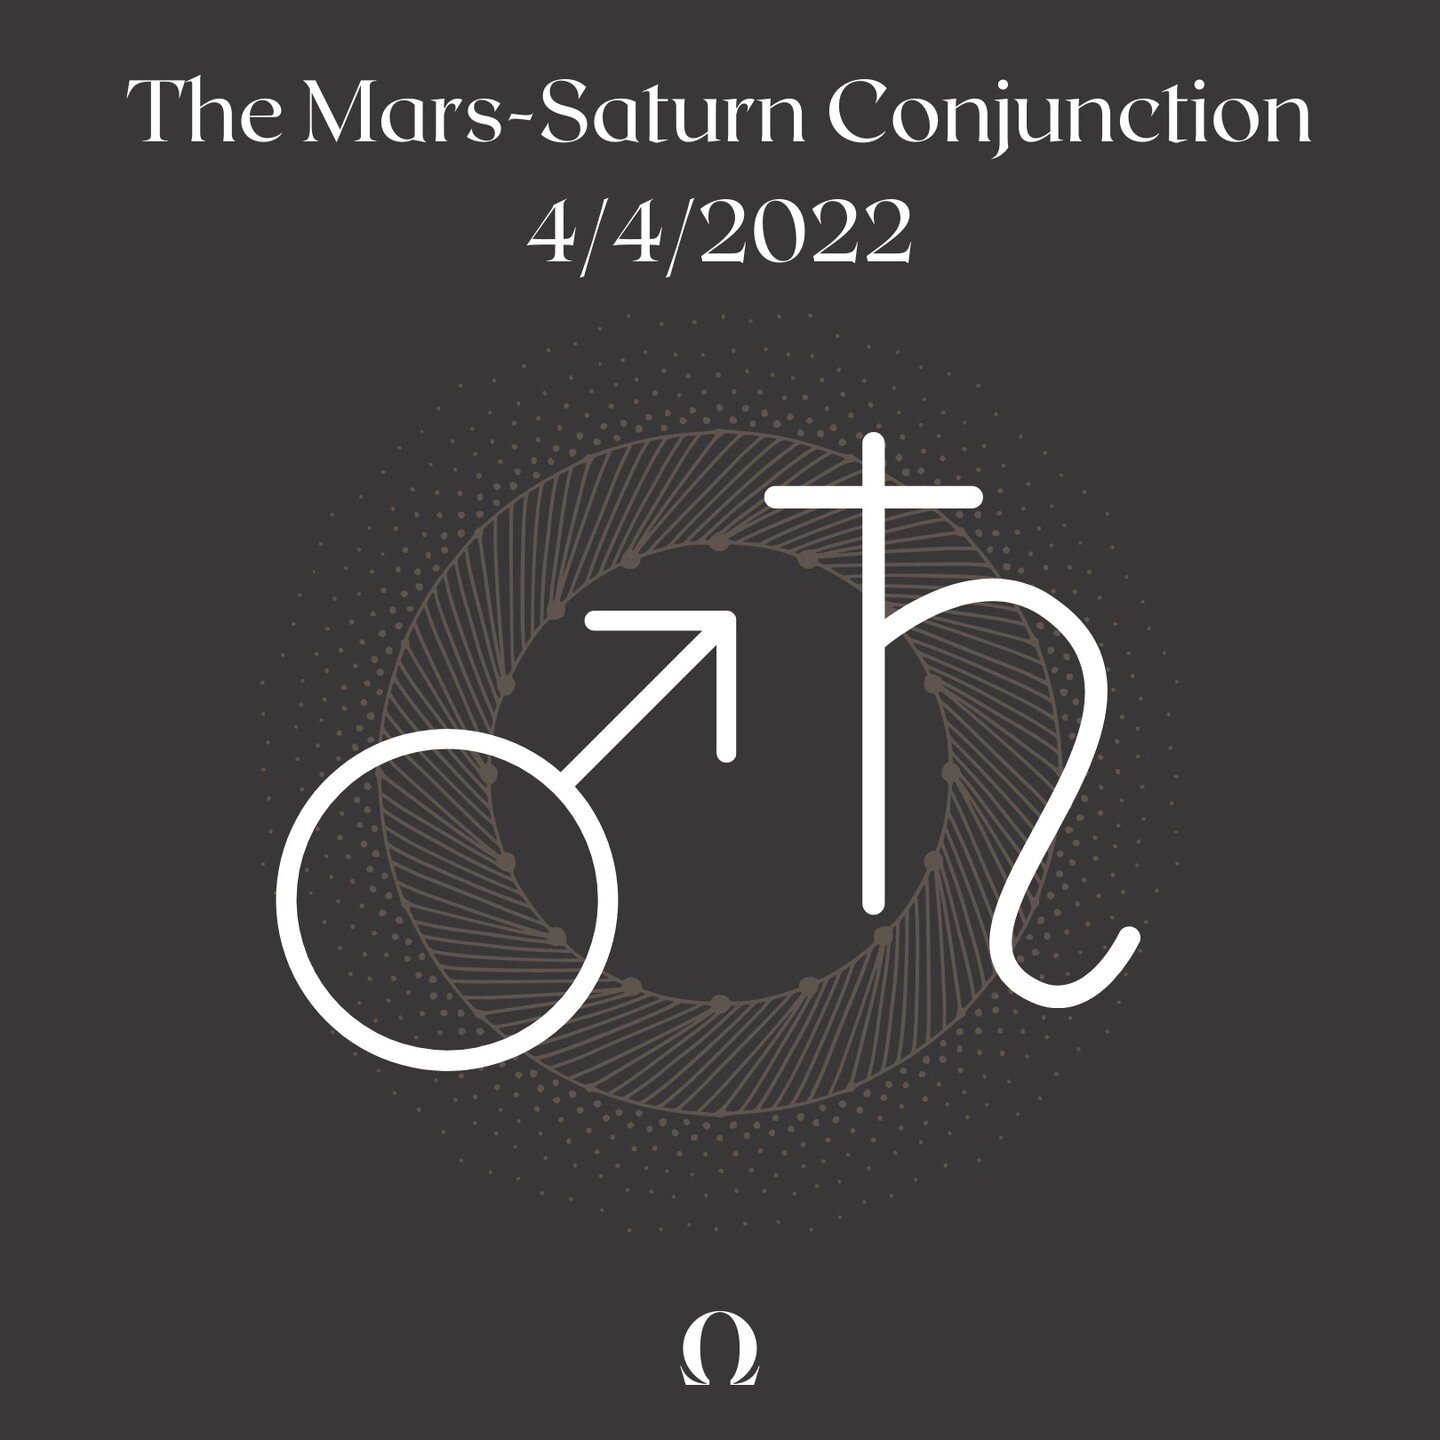 Today Mars &amp; Saturn conjoin in the sky.

Mars acts like a gas pedal. It energizes, intensifies and heats up anything it touches. On the other hand, Saturn is like the brake pedal. He stops, halts and breaks momentum. This pairing is kind of like 